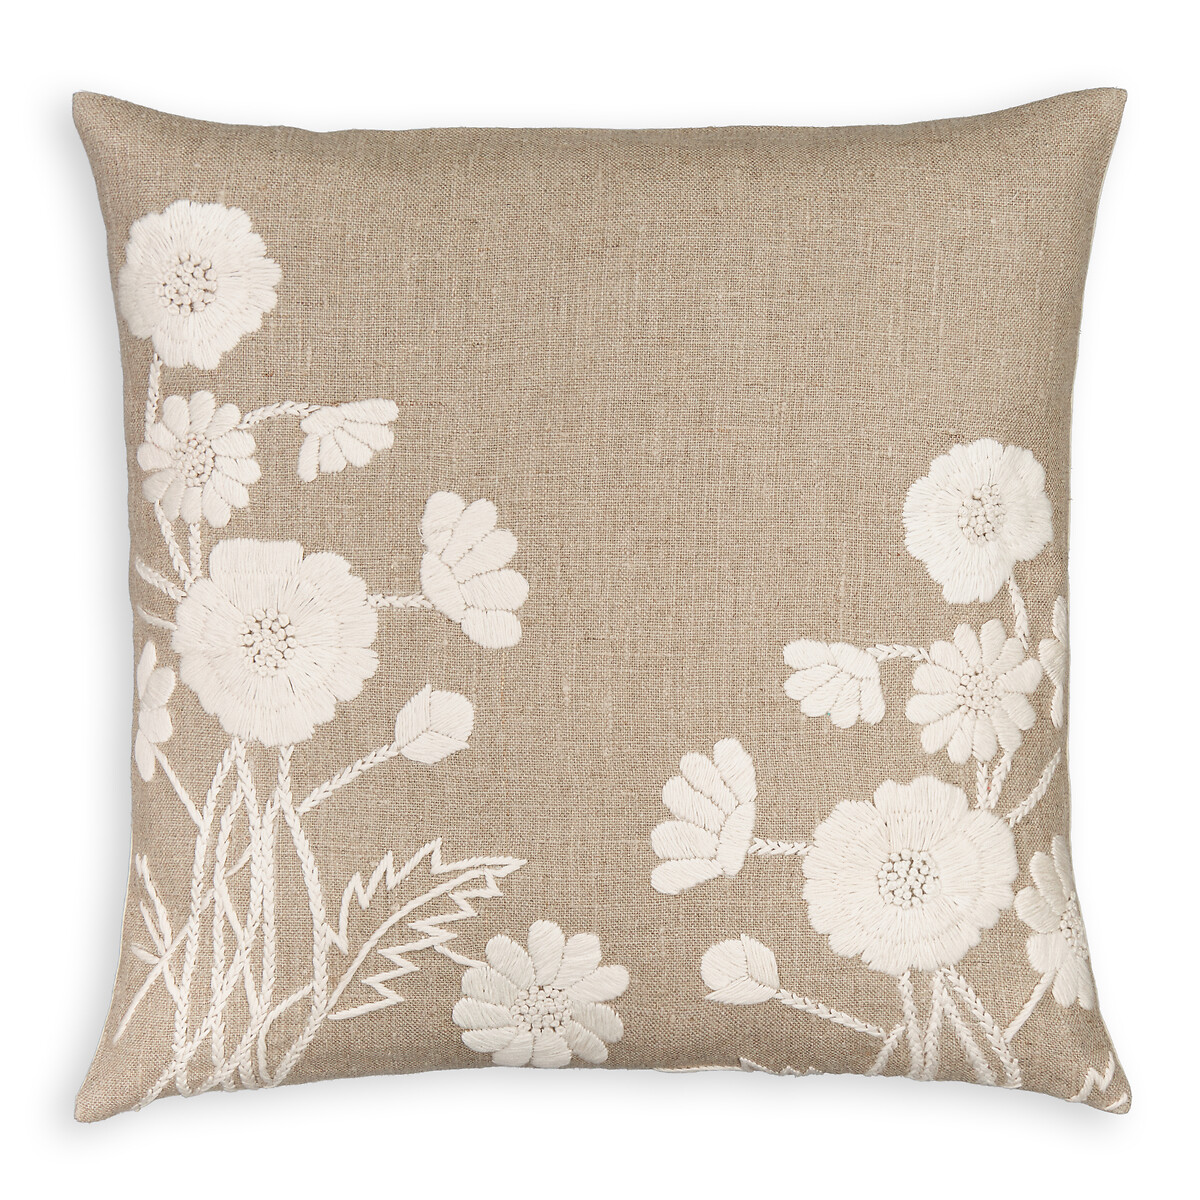 Netta Embroidered Floral Linen Cushion Cover